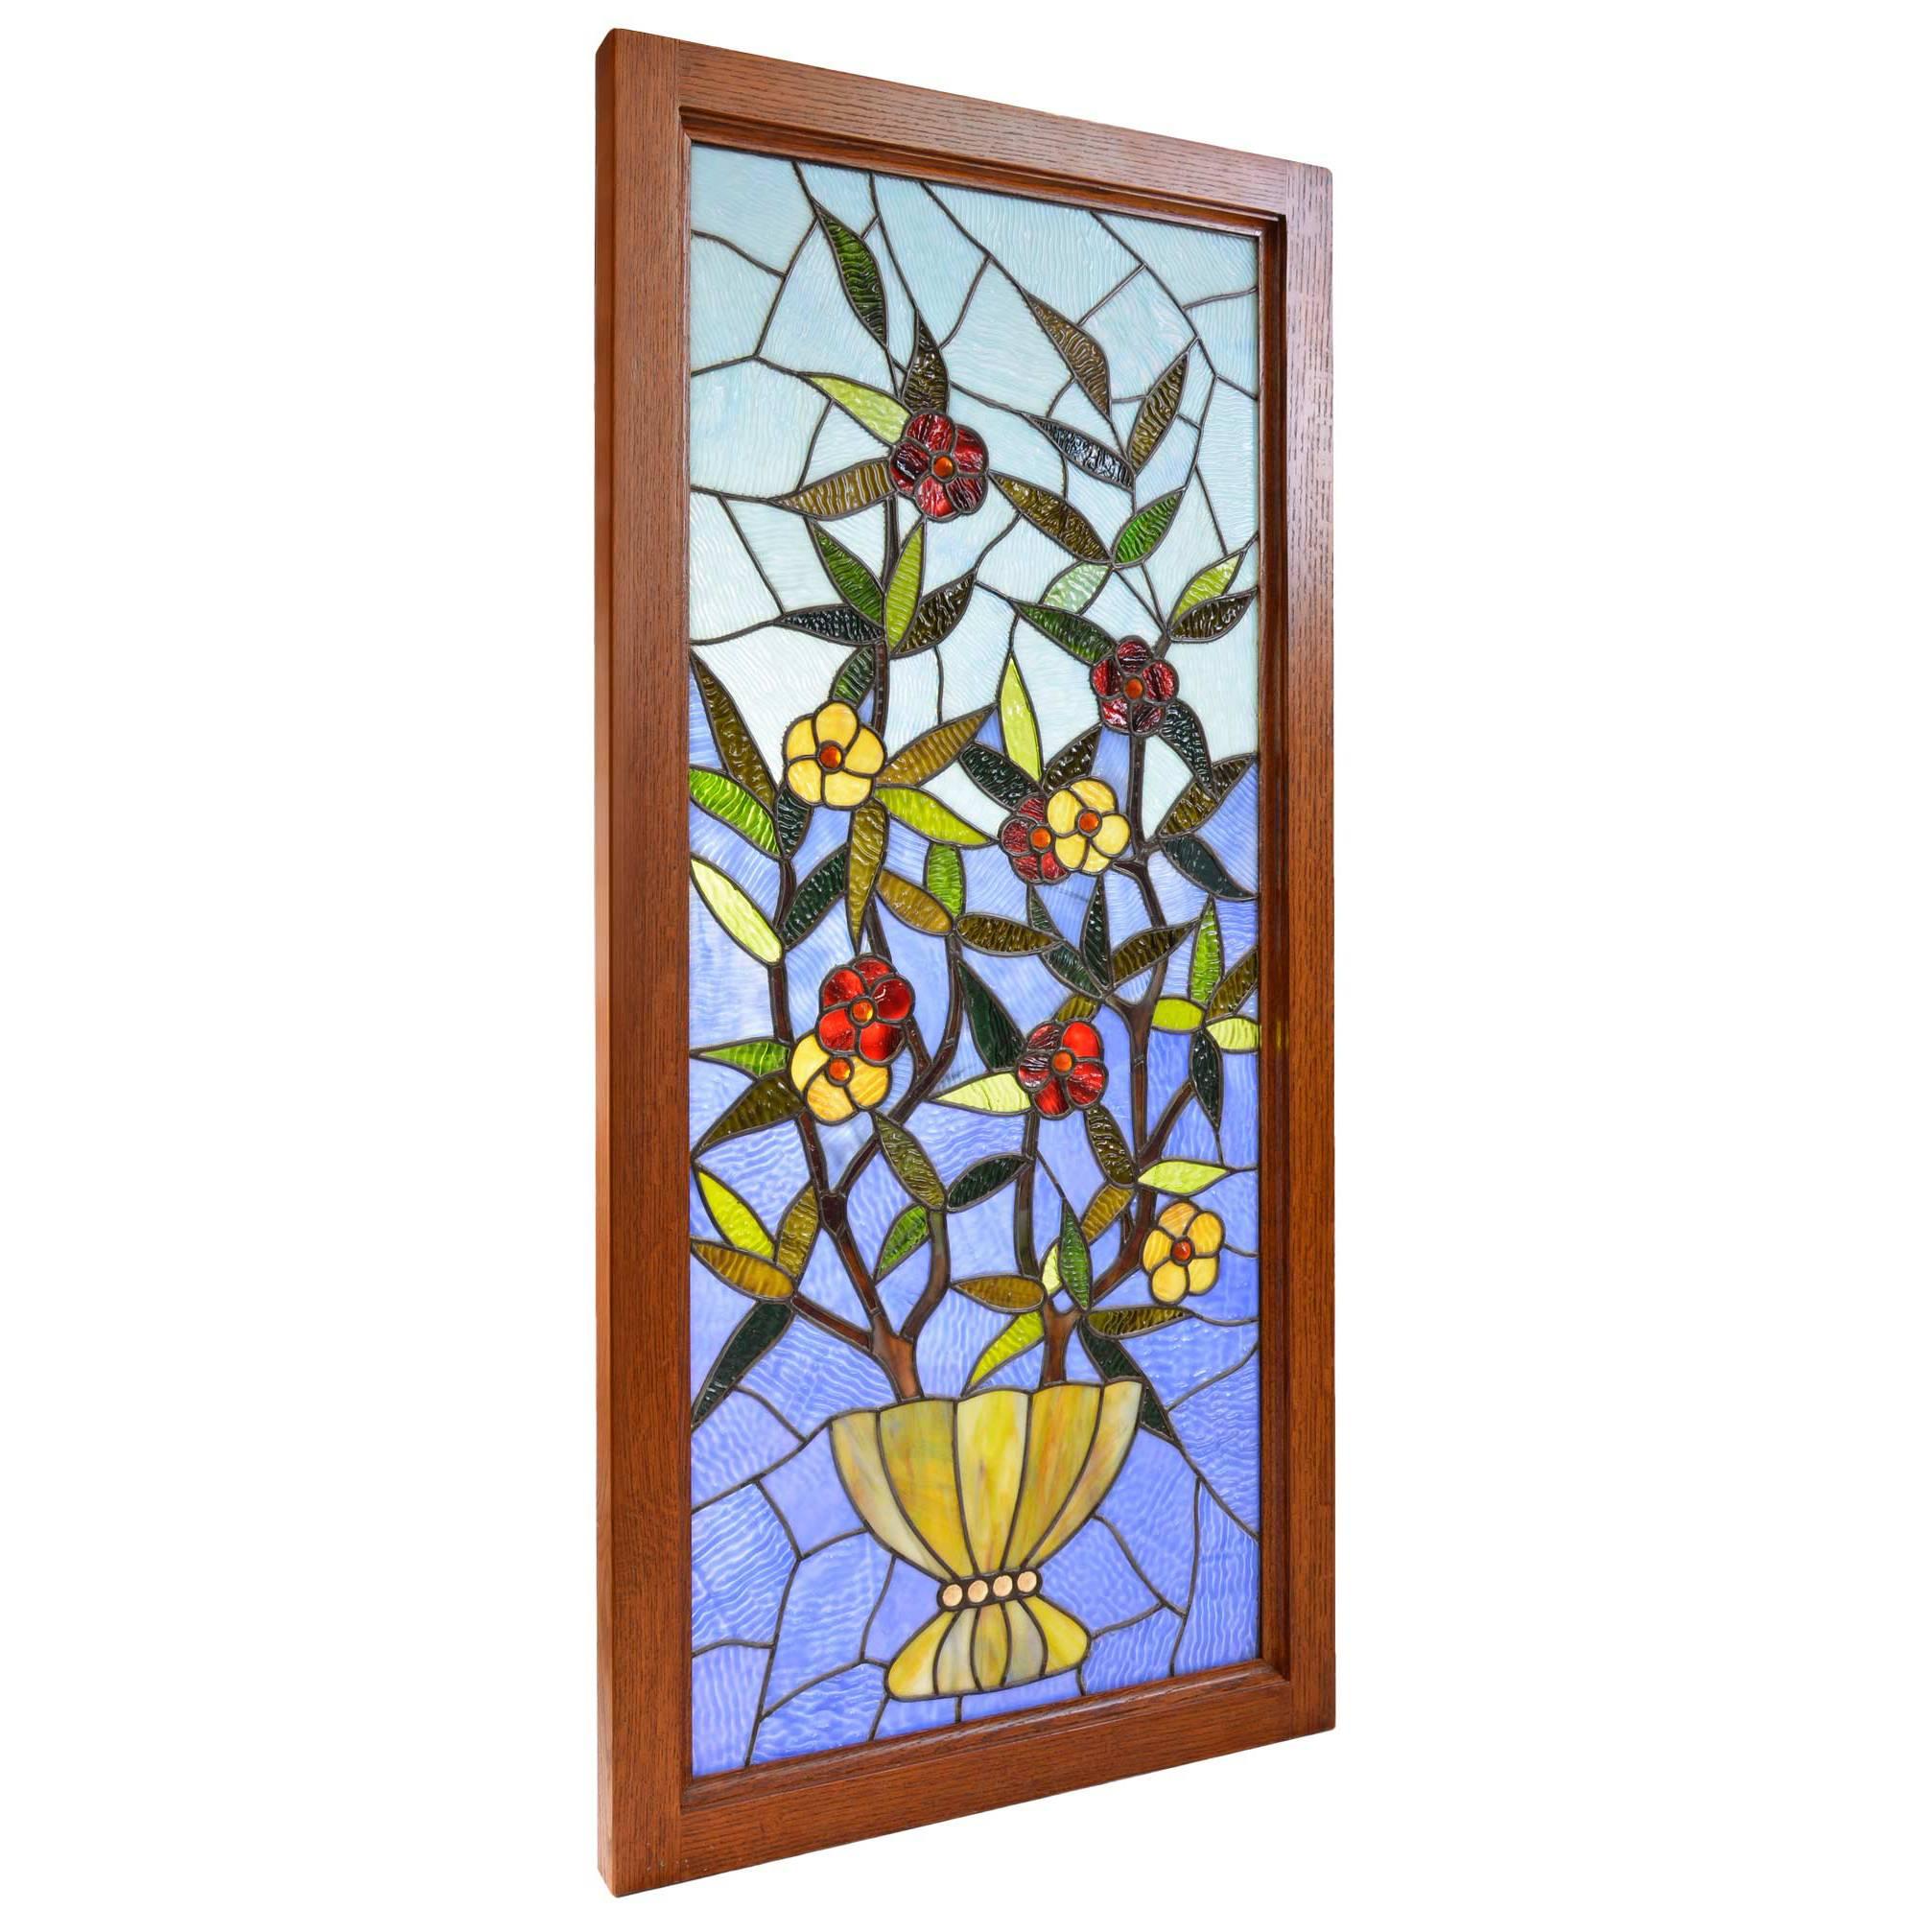 Late 19th Century Stained Glass Floral Bouquet Window